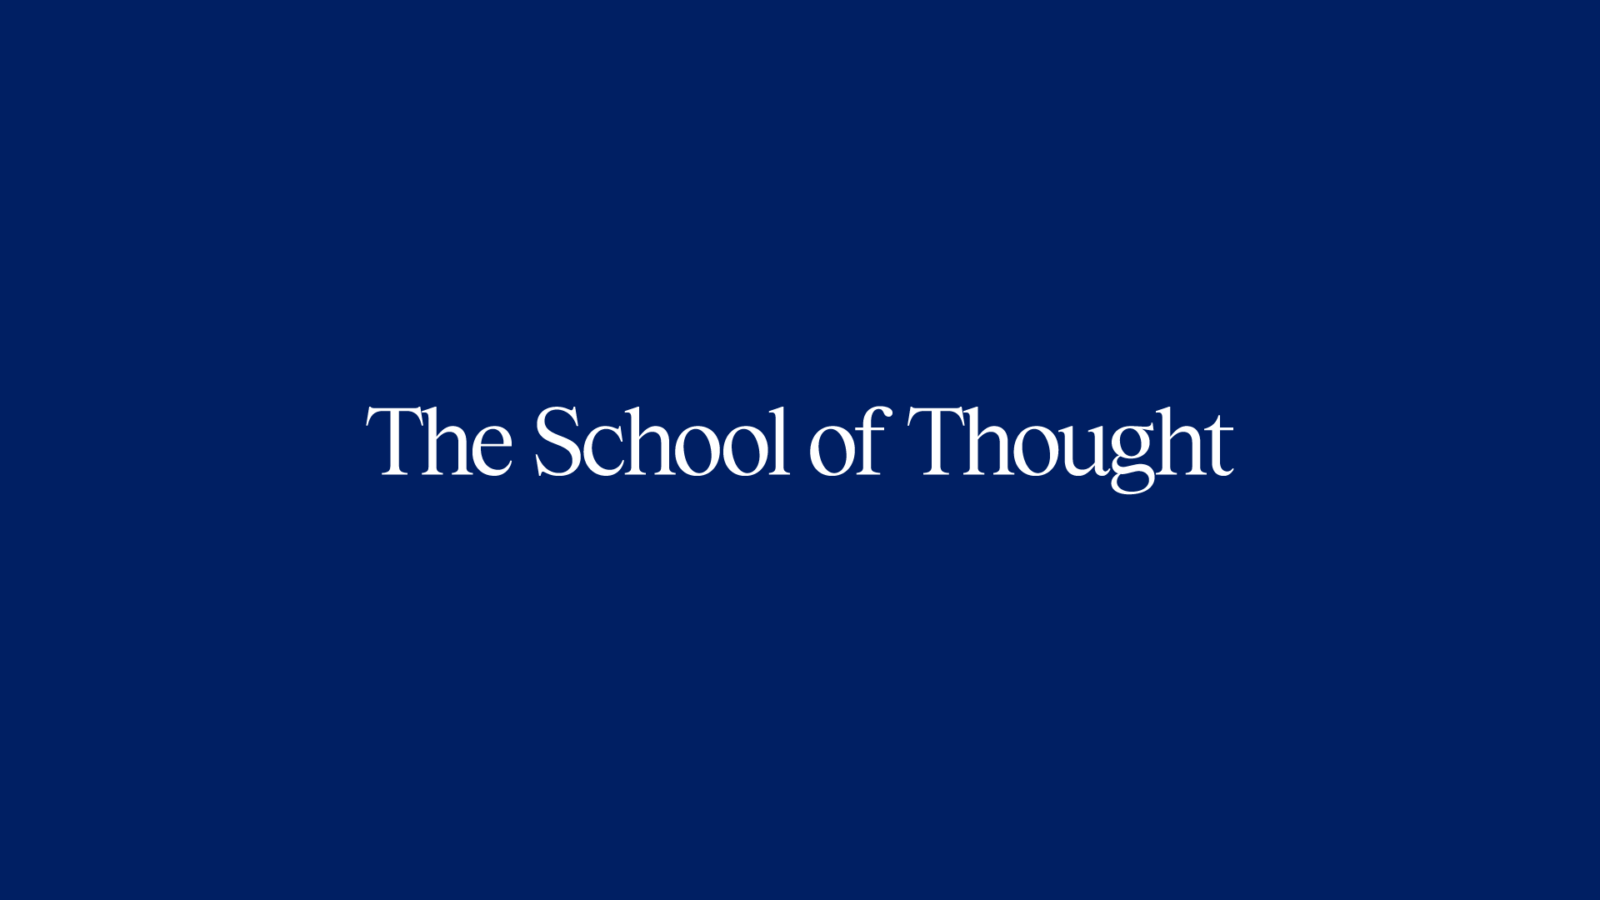 The School of Thought: Francis Parker School, Education Branding, Brand Language